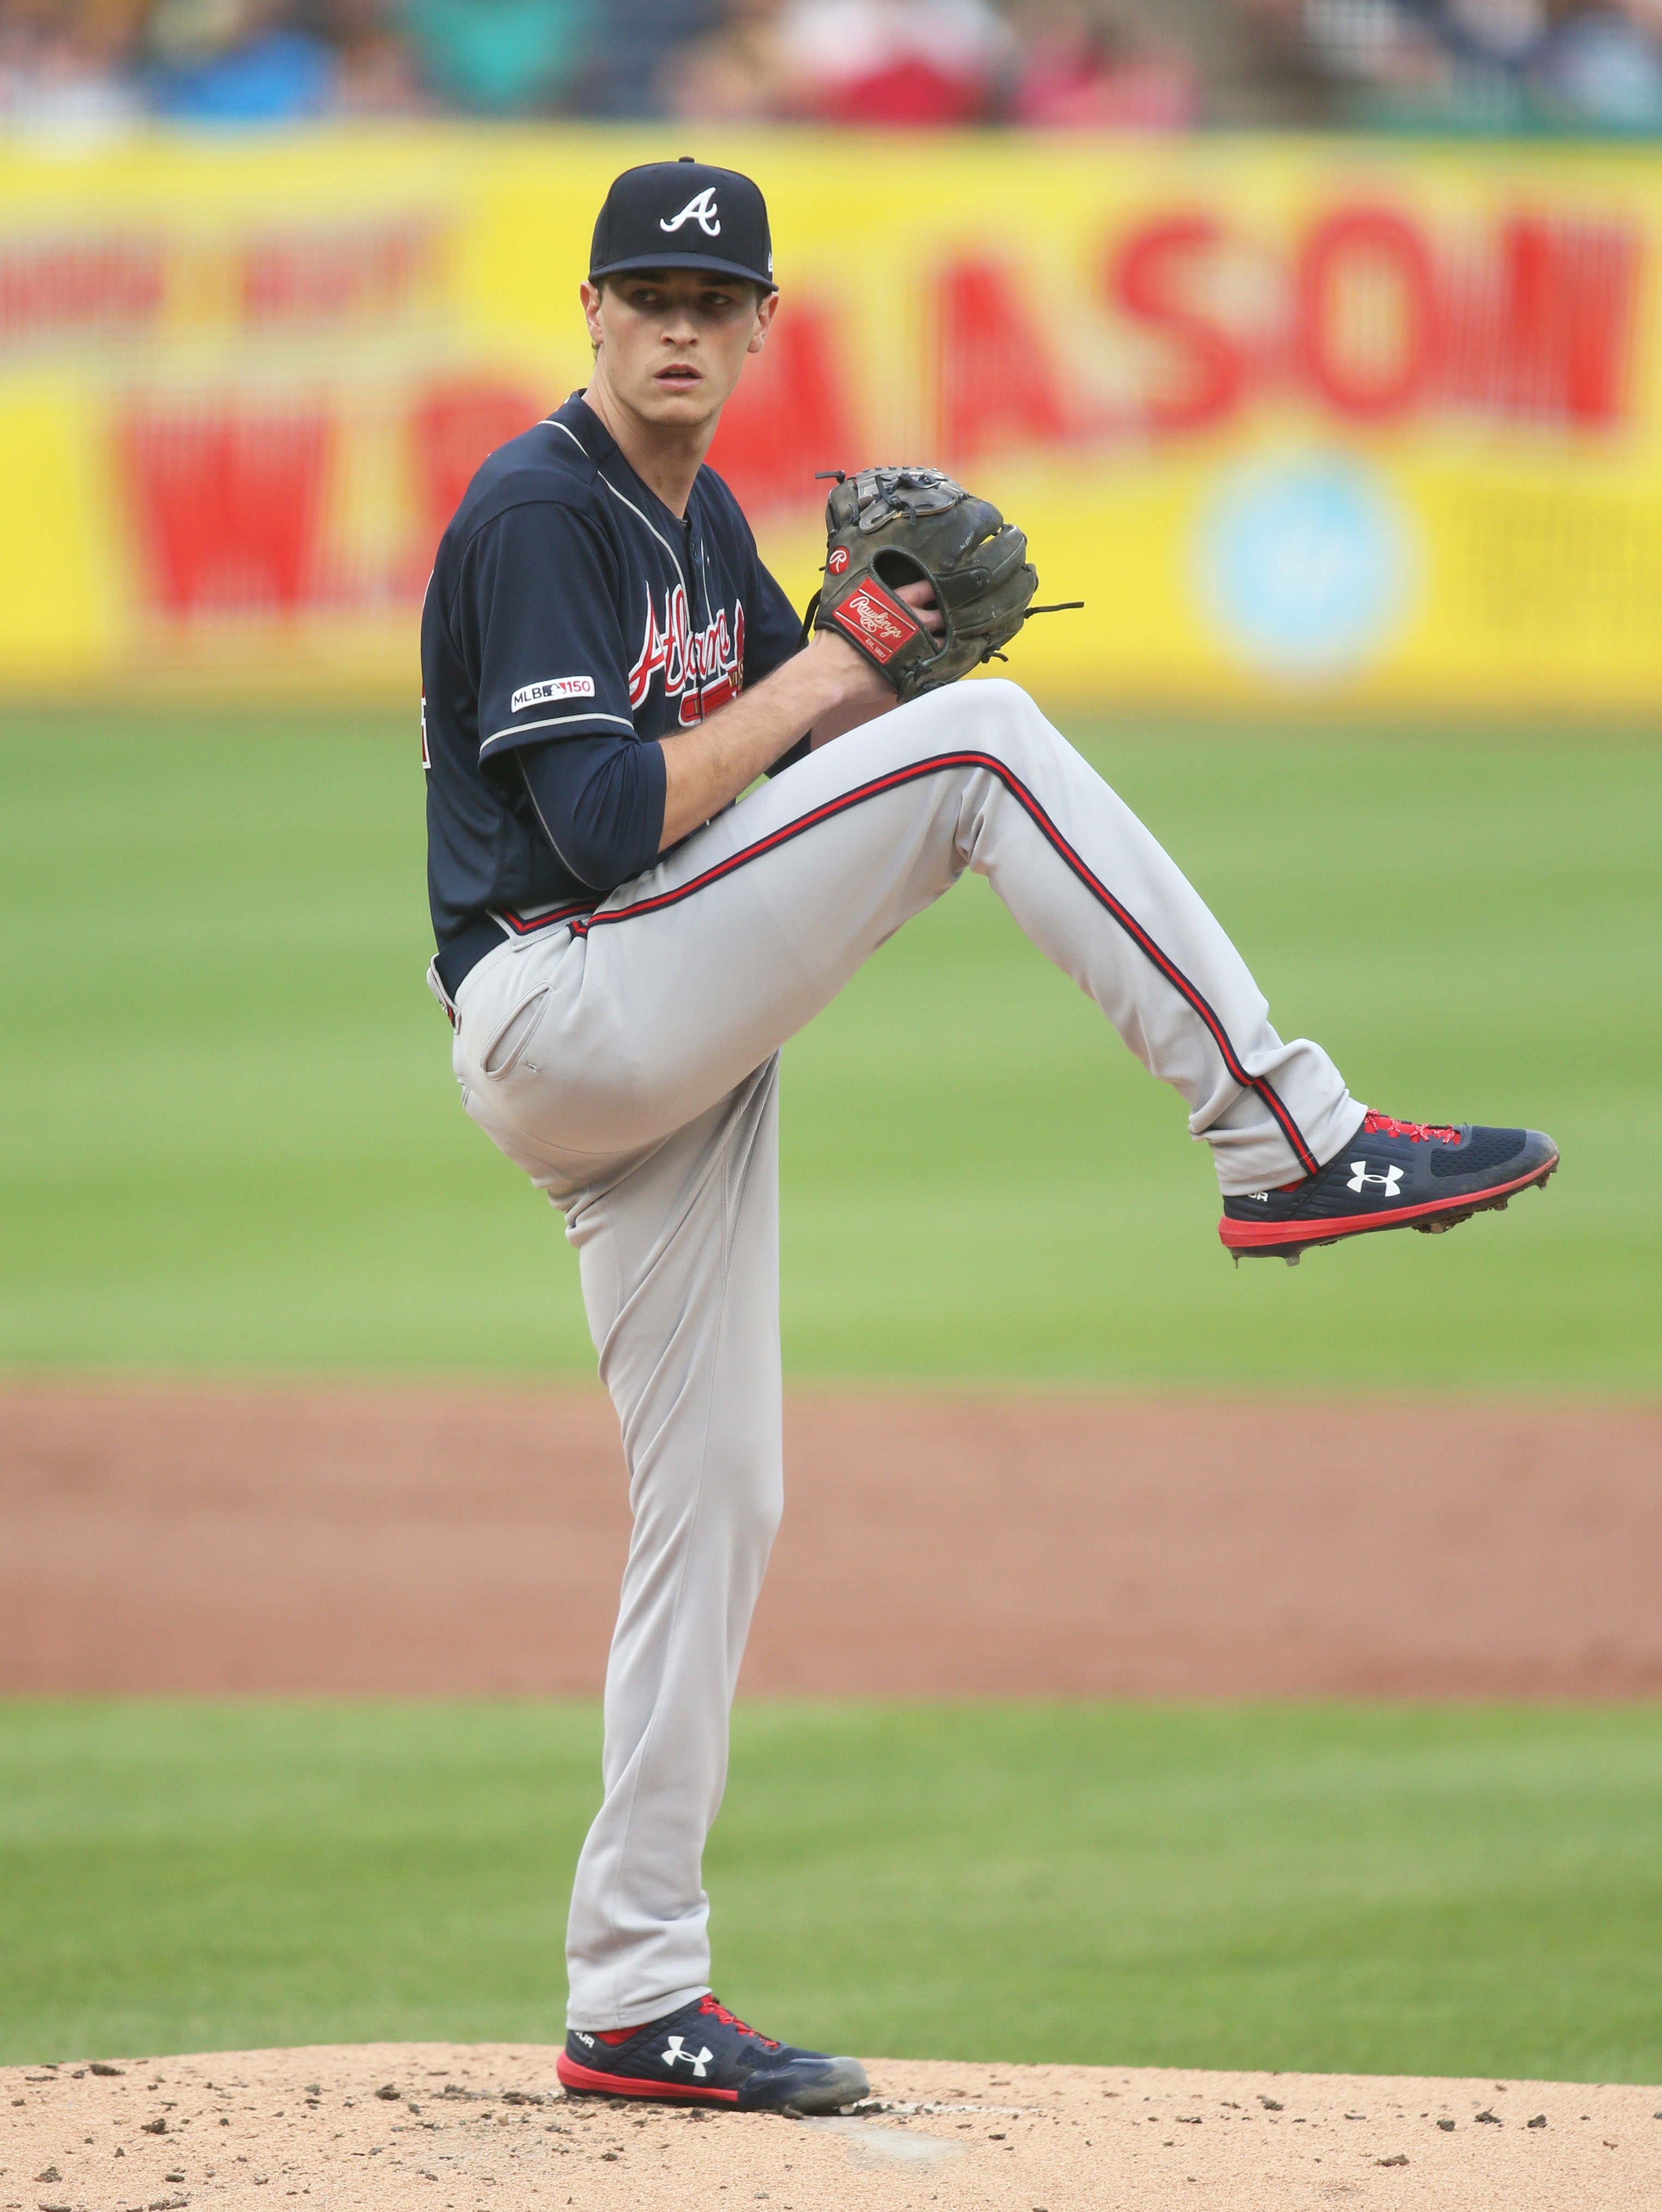 Max Fried - MLB Starting pitcher - News, Stats, Bio and more - The